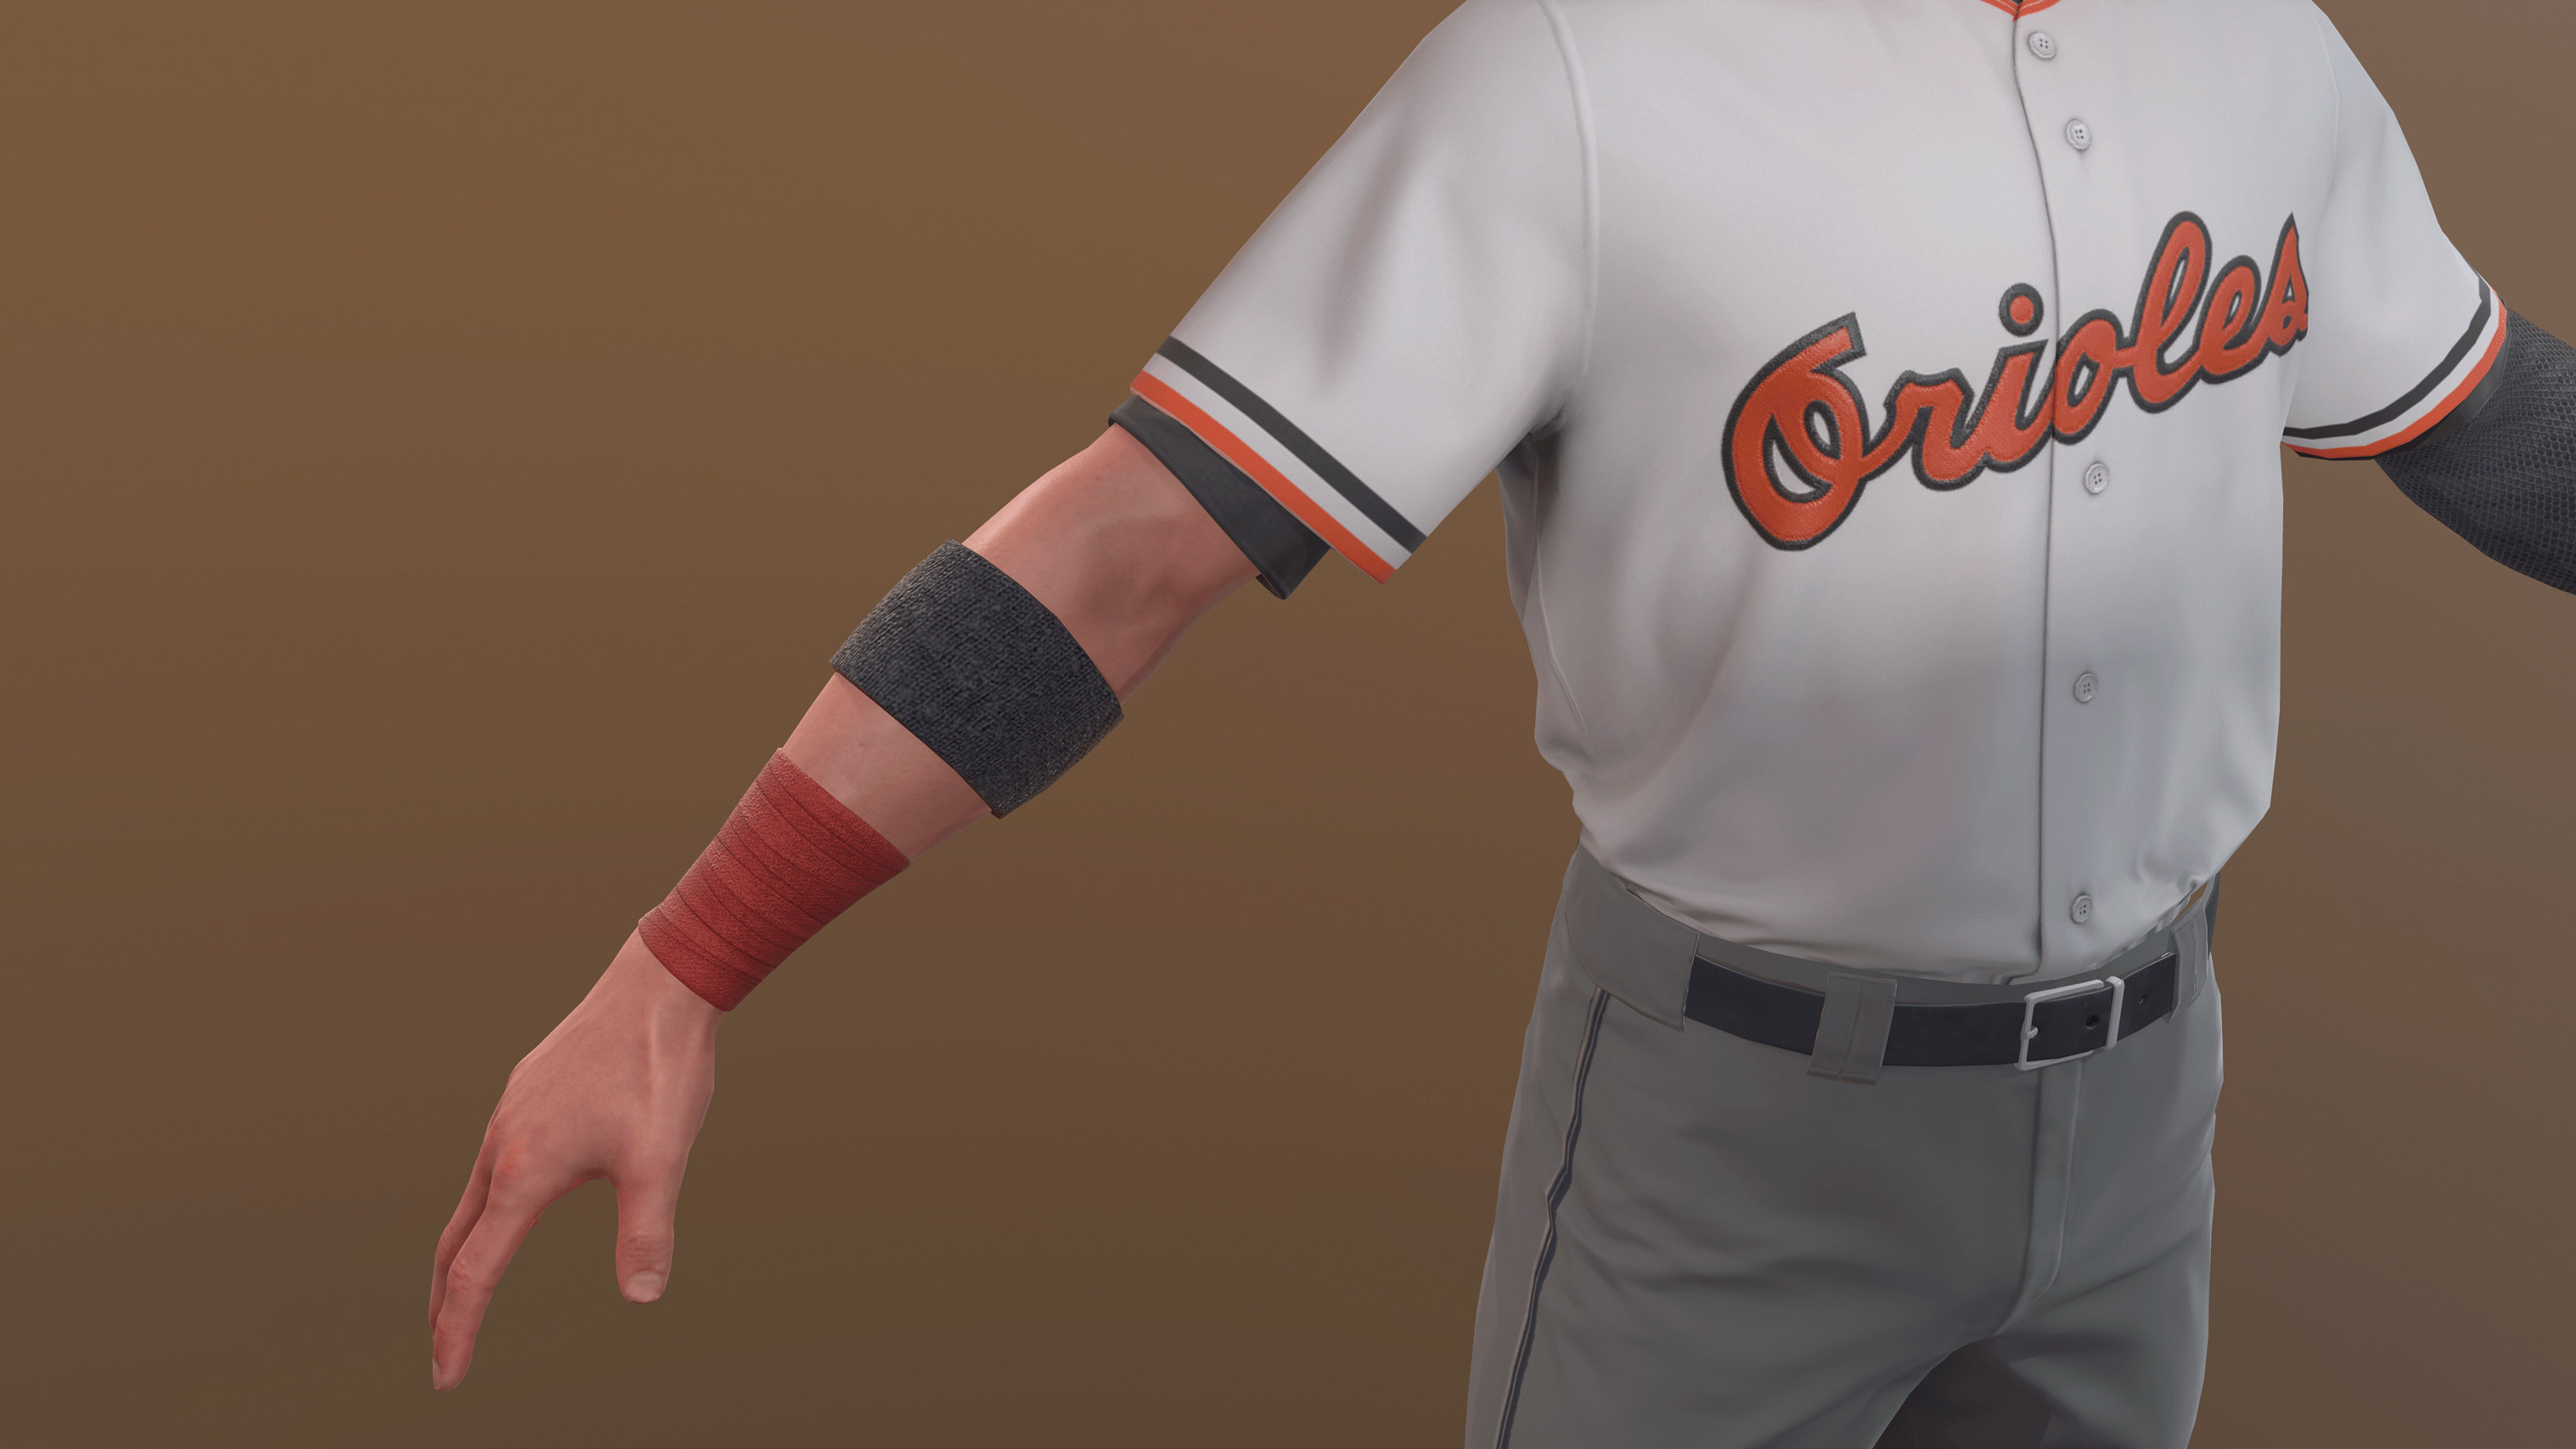 Wrist tape and arm band